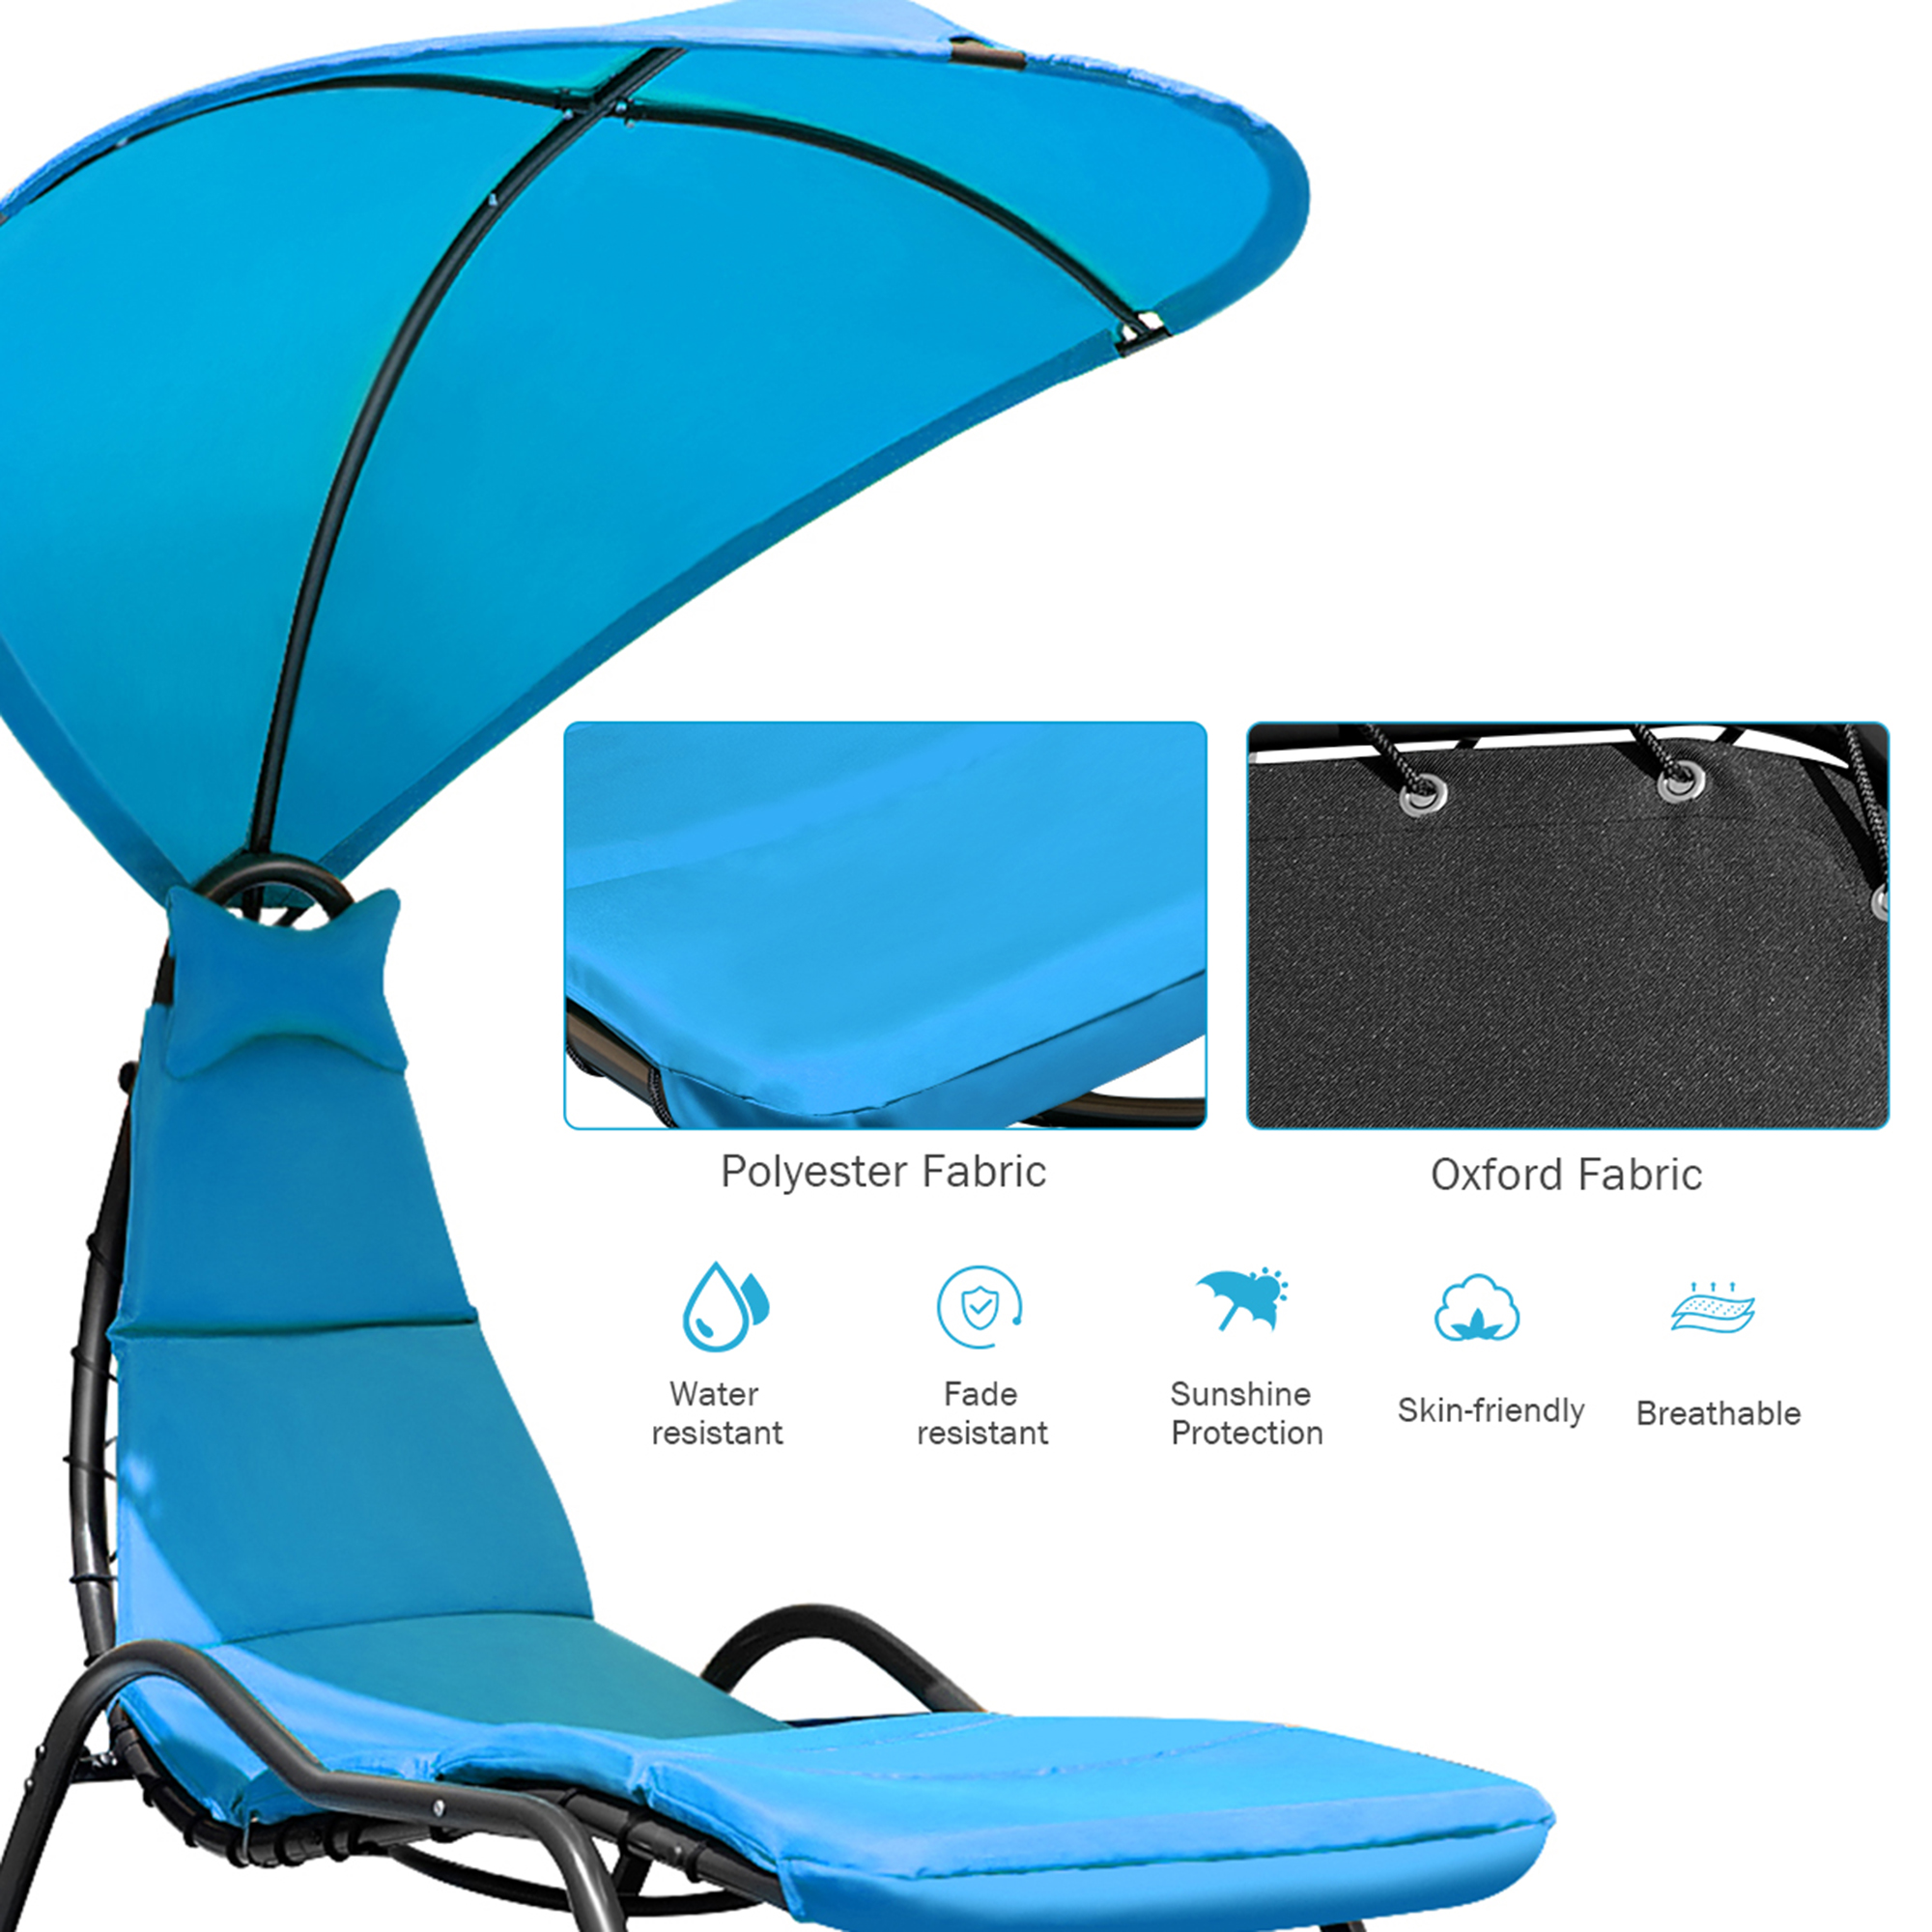 Gymax Patio Lounge Chair Chaise Garden w/ Steel Frame Cushion Canopy Turquoise - image 2 of 9